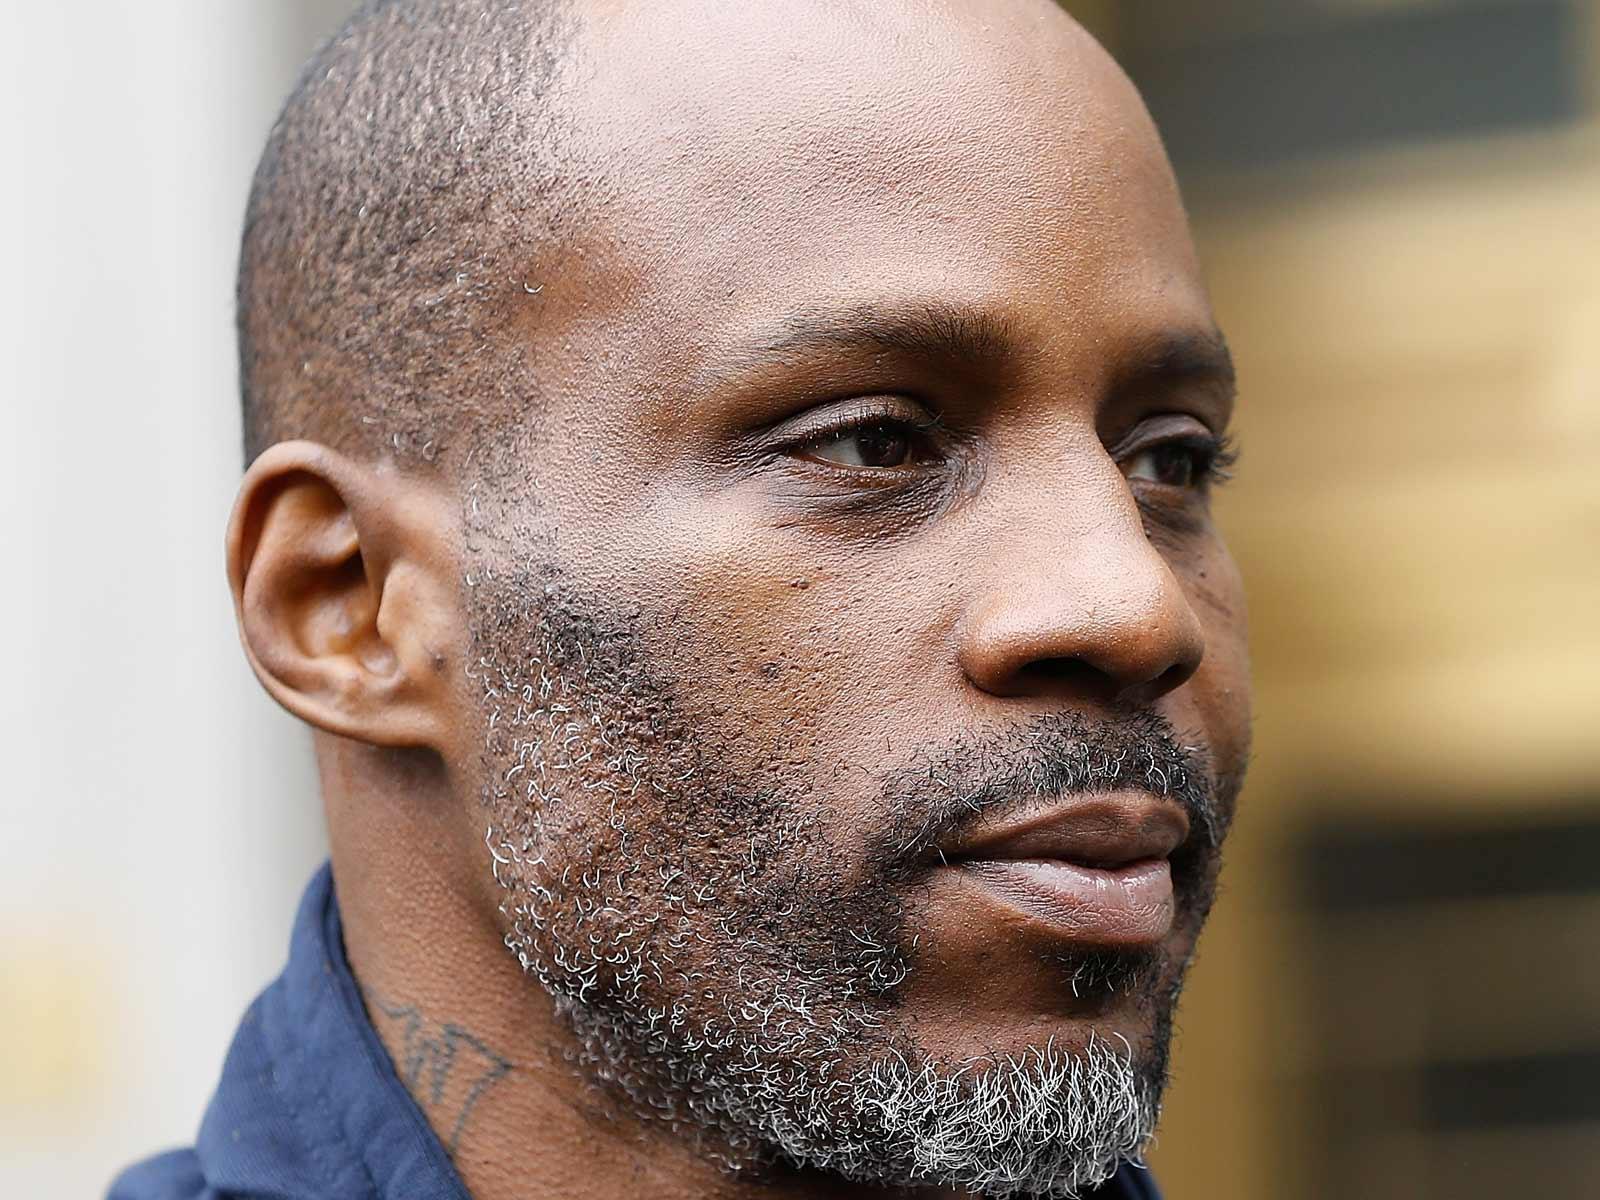 DMX Wants to Go to ‘Orange is the New Black’ Prison